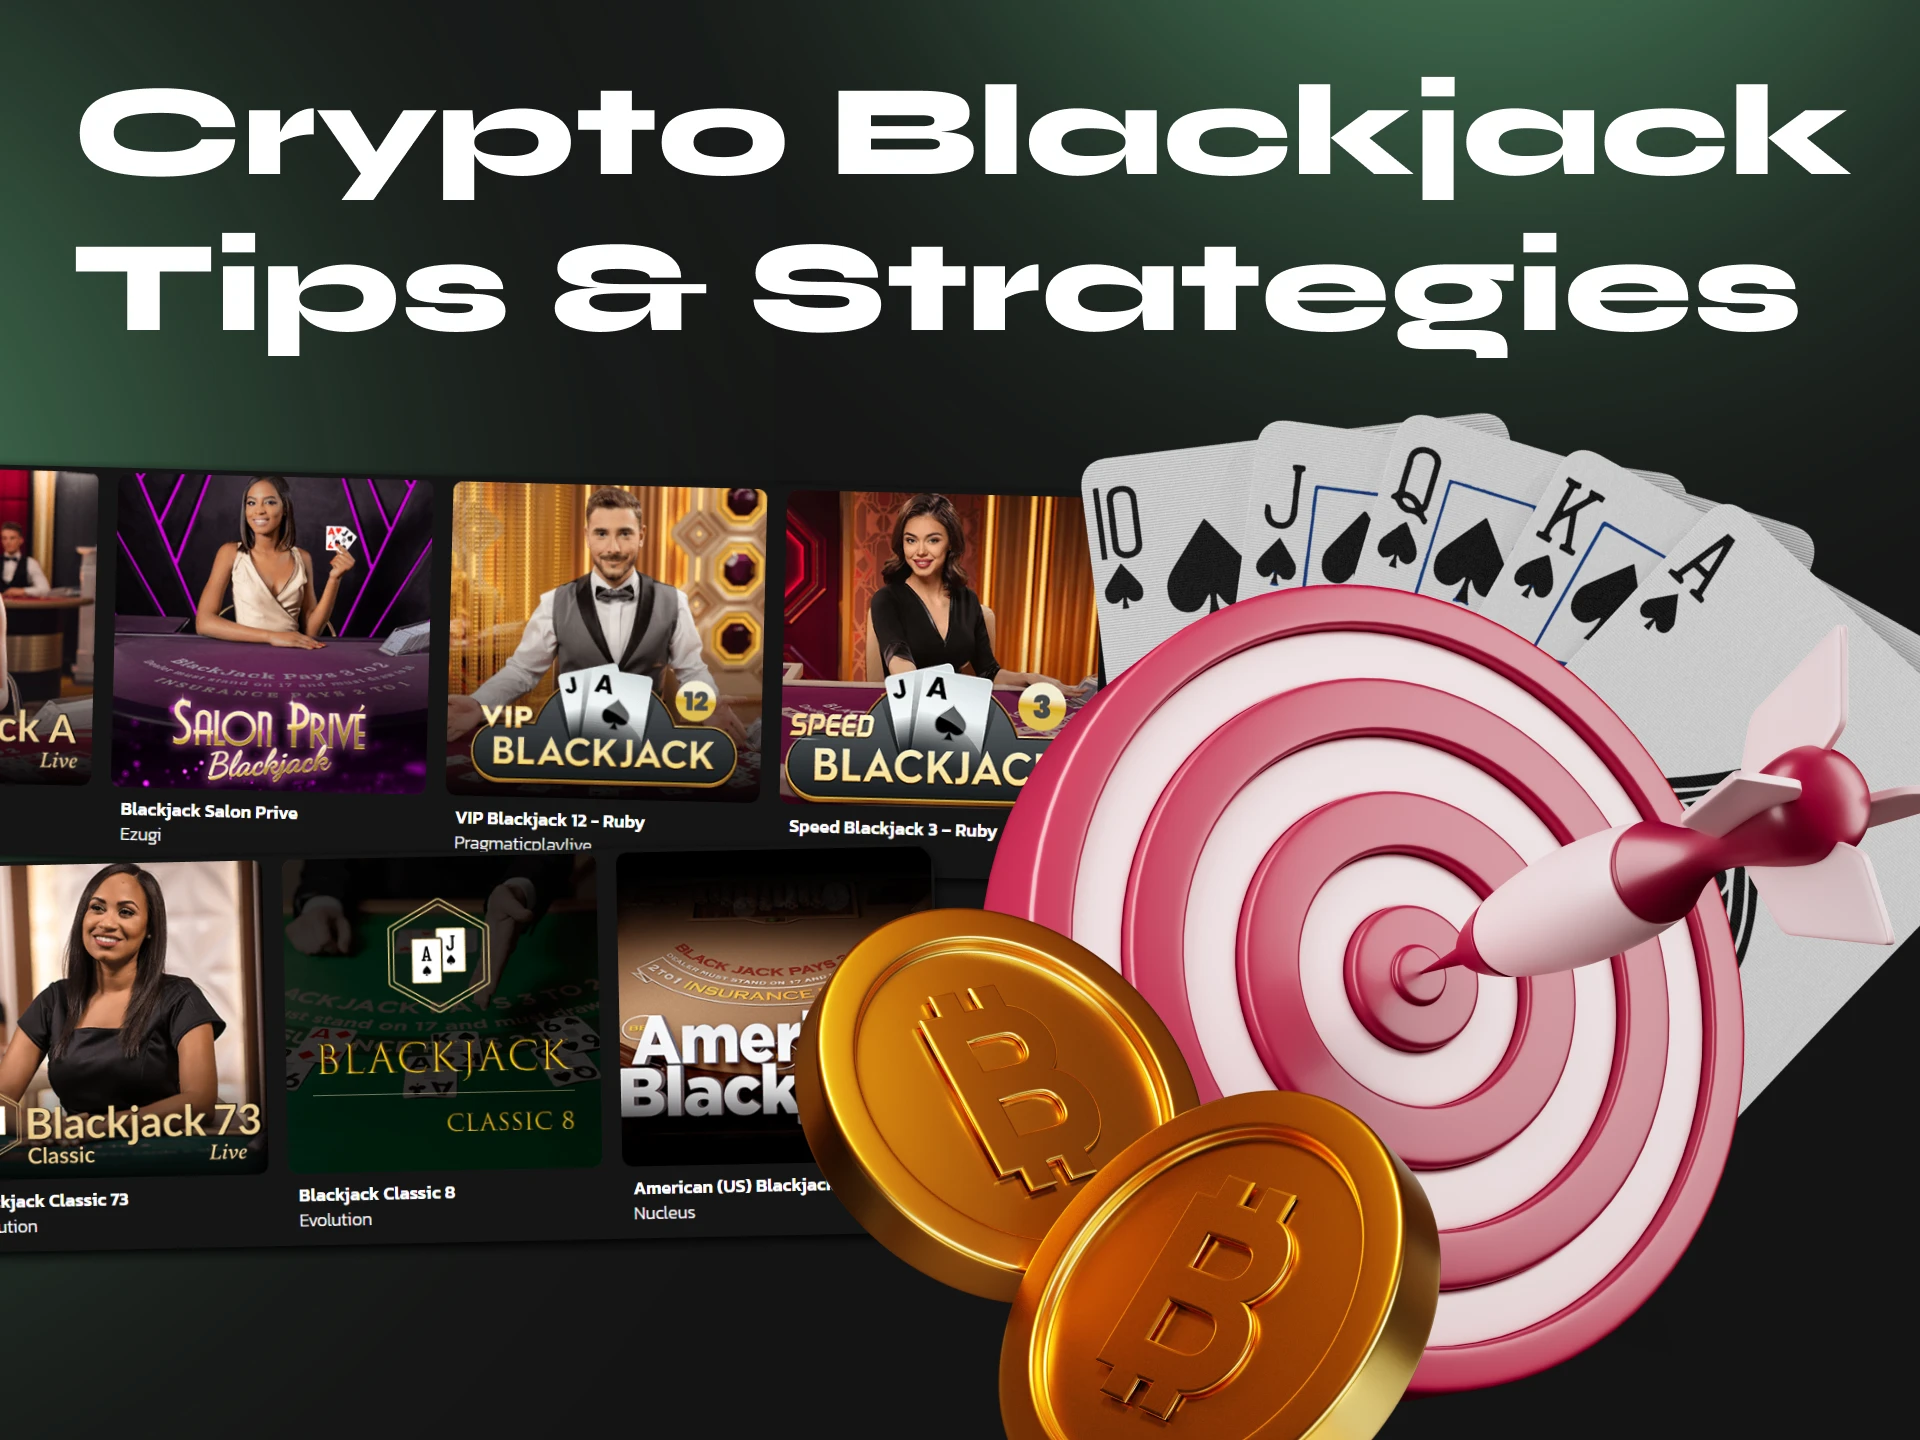 These tips will help you win more at crypto blackjack.